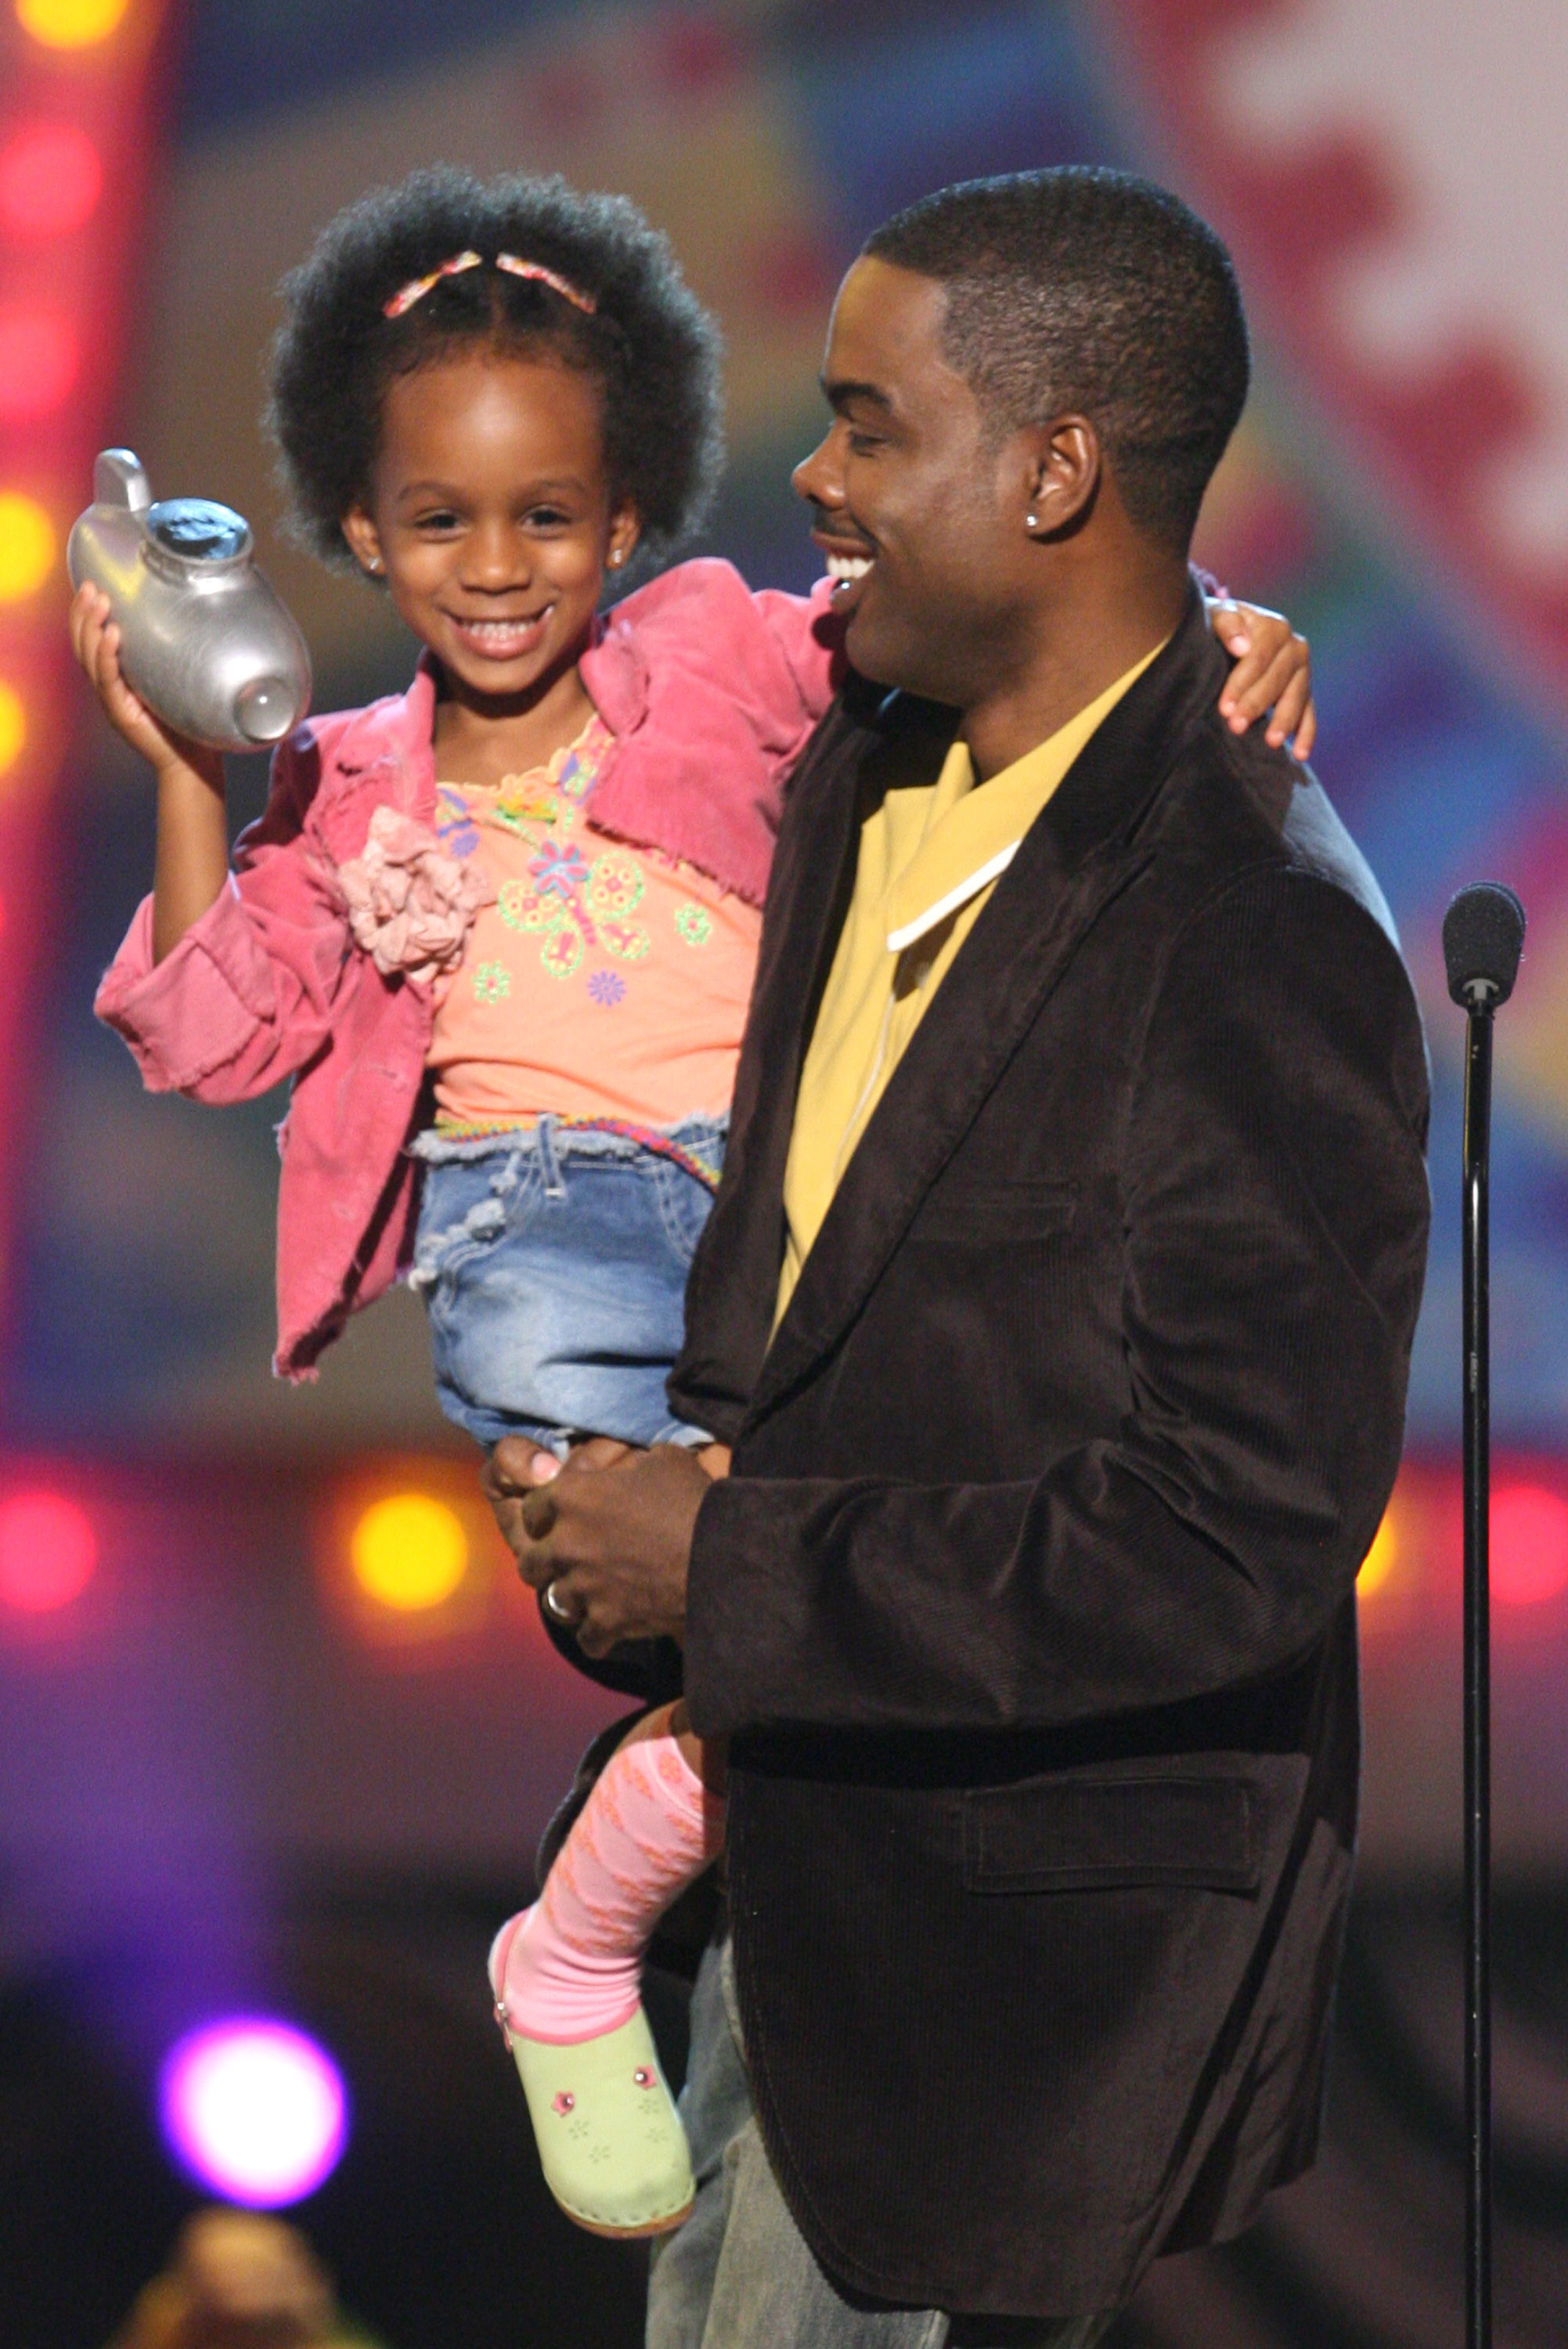 Lola Rock and her dad, Chris Rock, are pictured onstage during Nickelodeon's 19th Annual Kids' Choice Awards at the Pauley Pavilion on an unspecified date in Westwood, California | Source: Getty Images